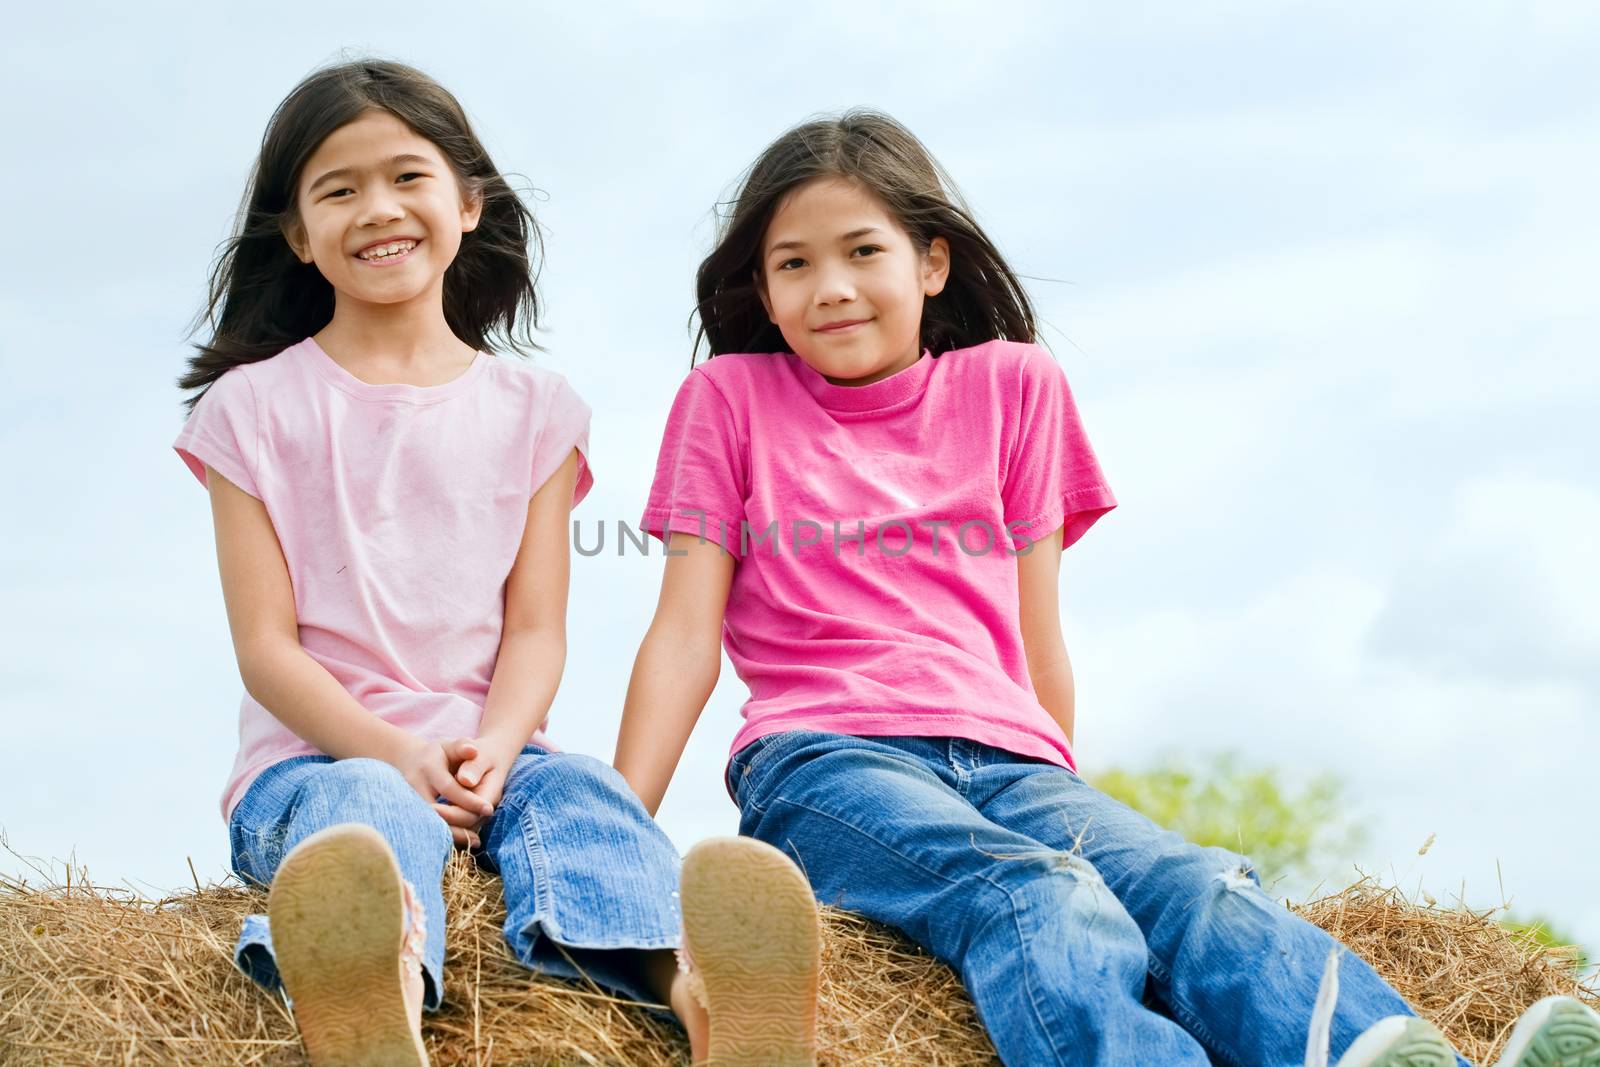 two young girls sitting on top of haybale by jarenwicklund